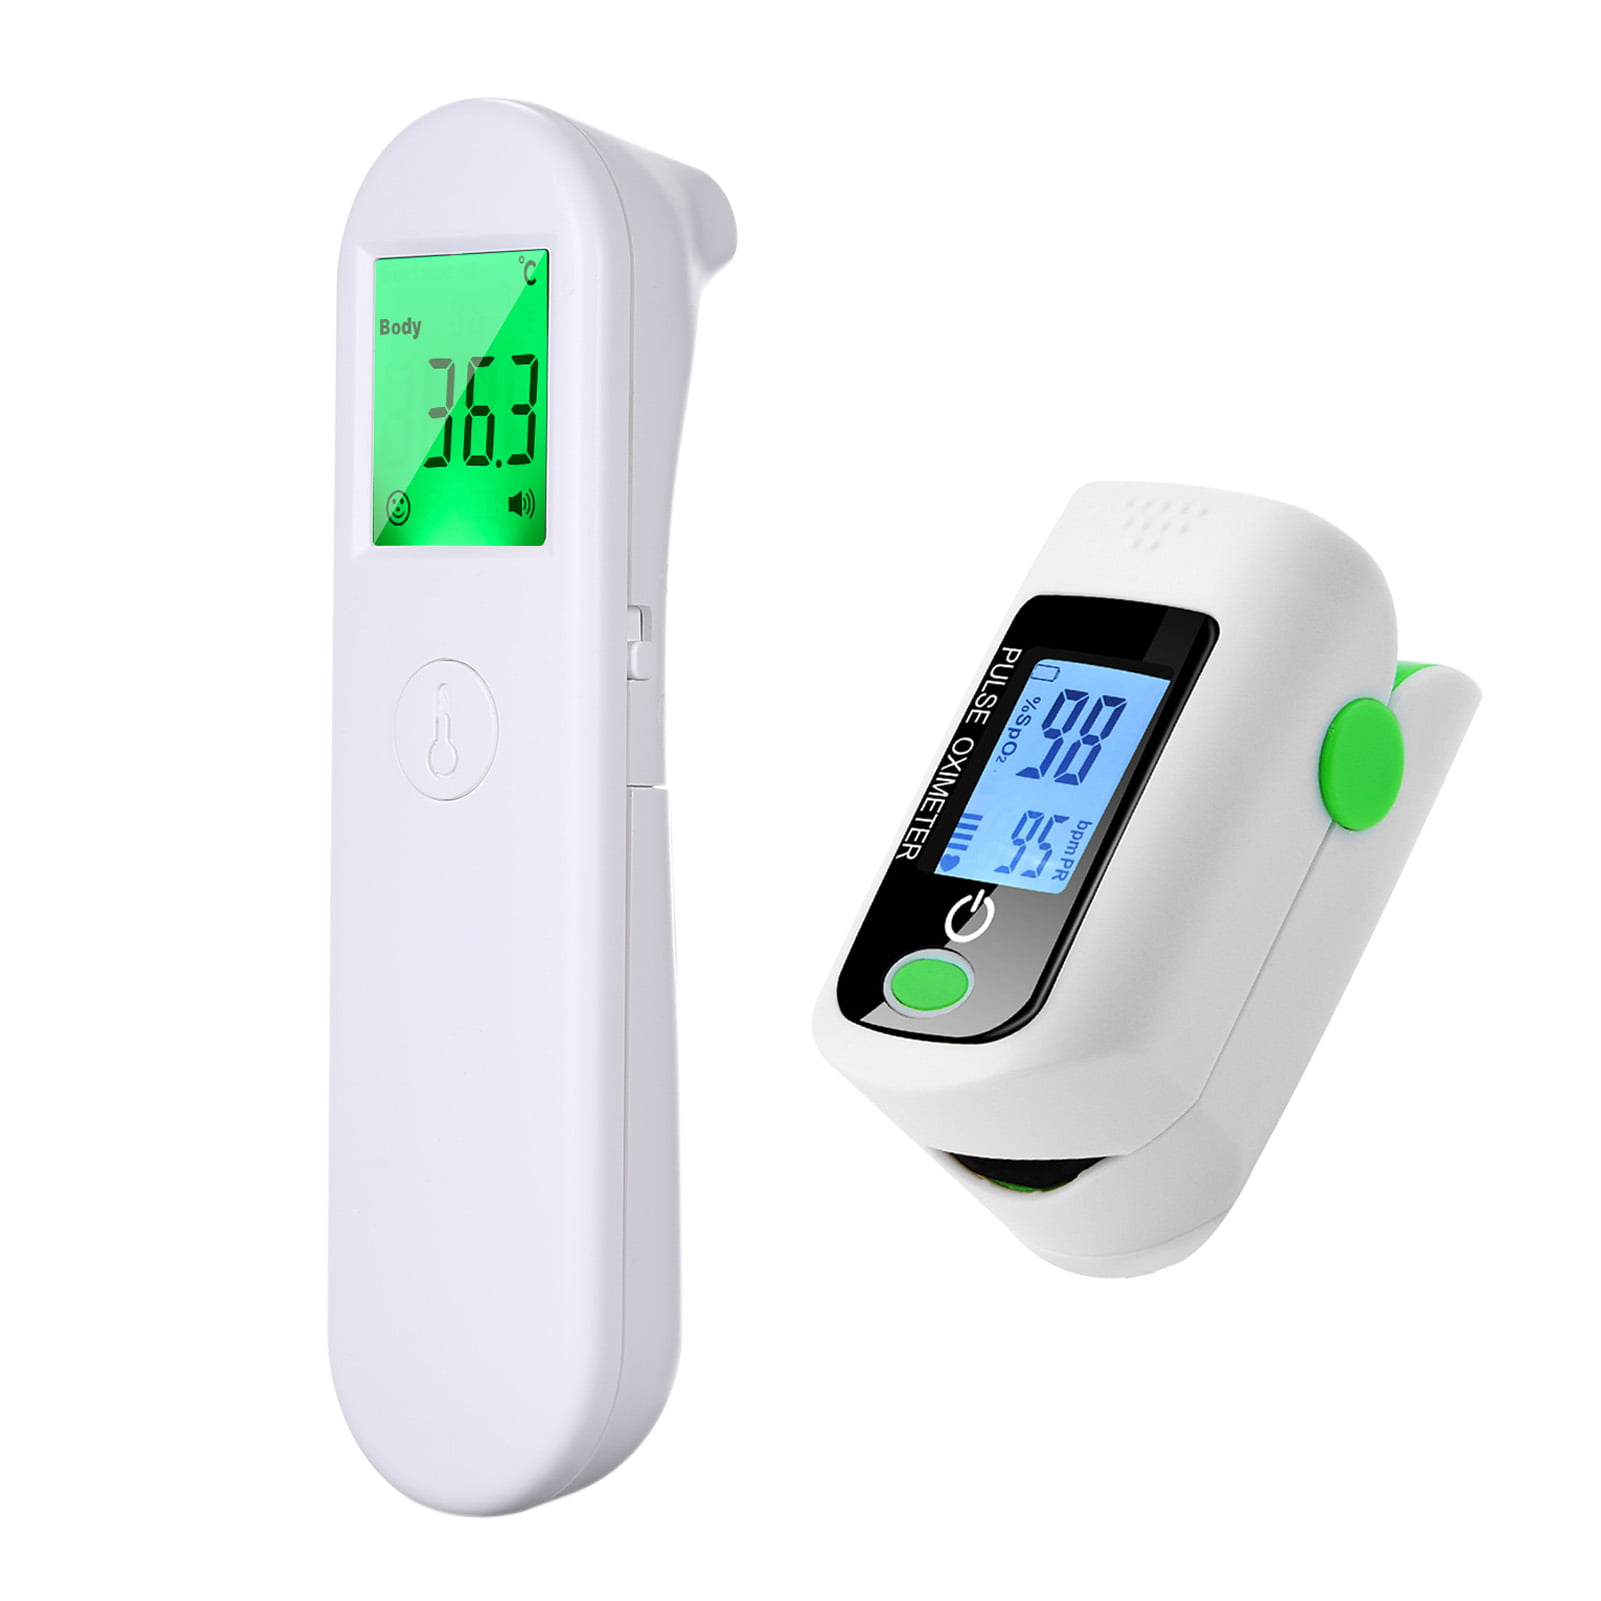 Lixada Non-Contact Infrared Thermometer + Home Sports Travel Fingertip Pulse Oximeter